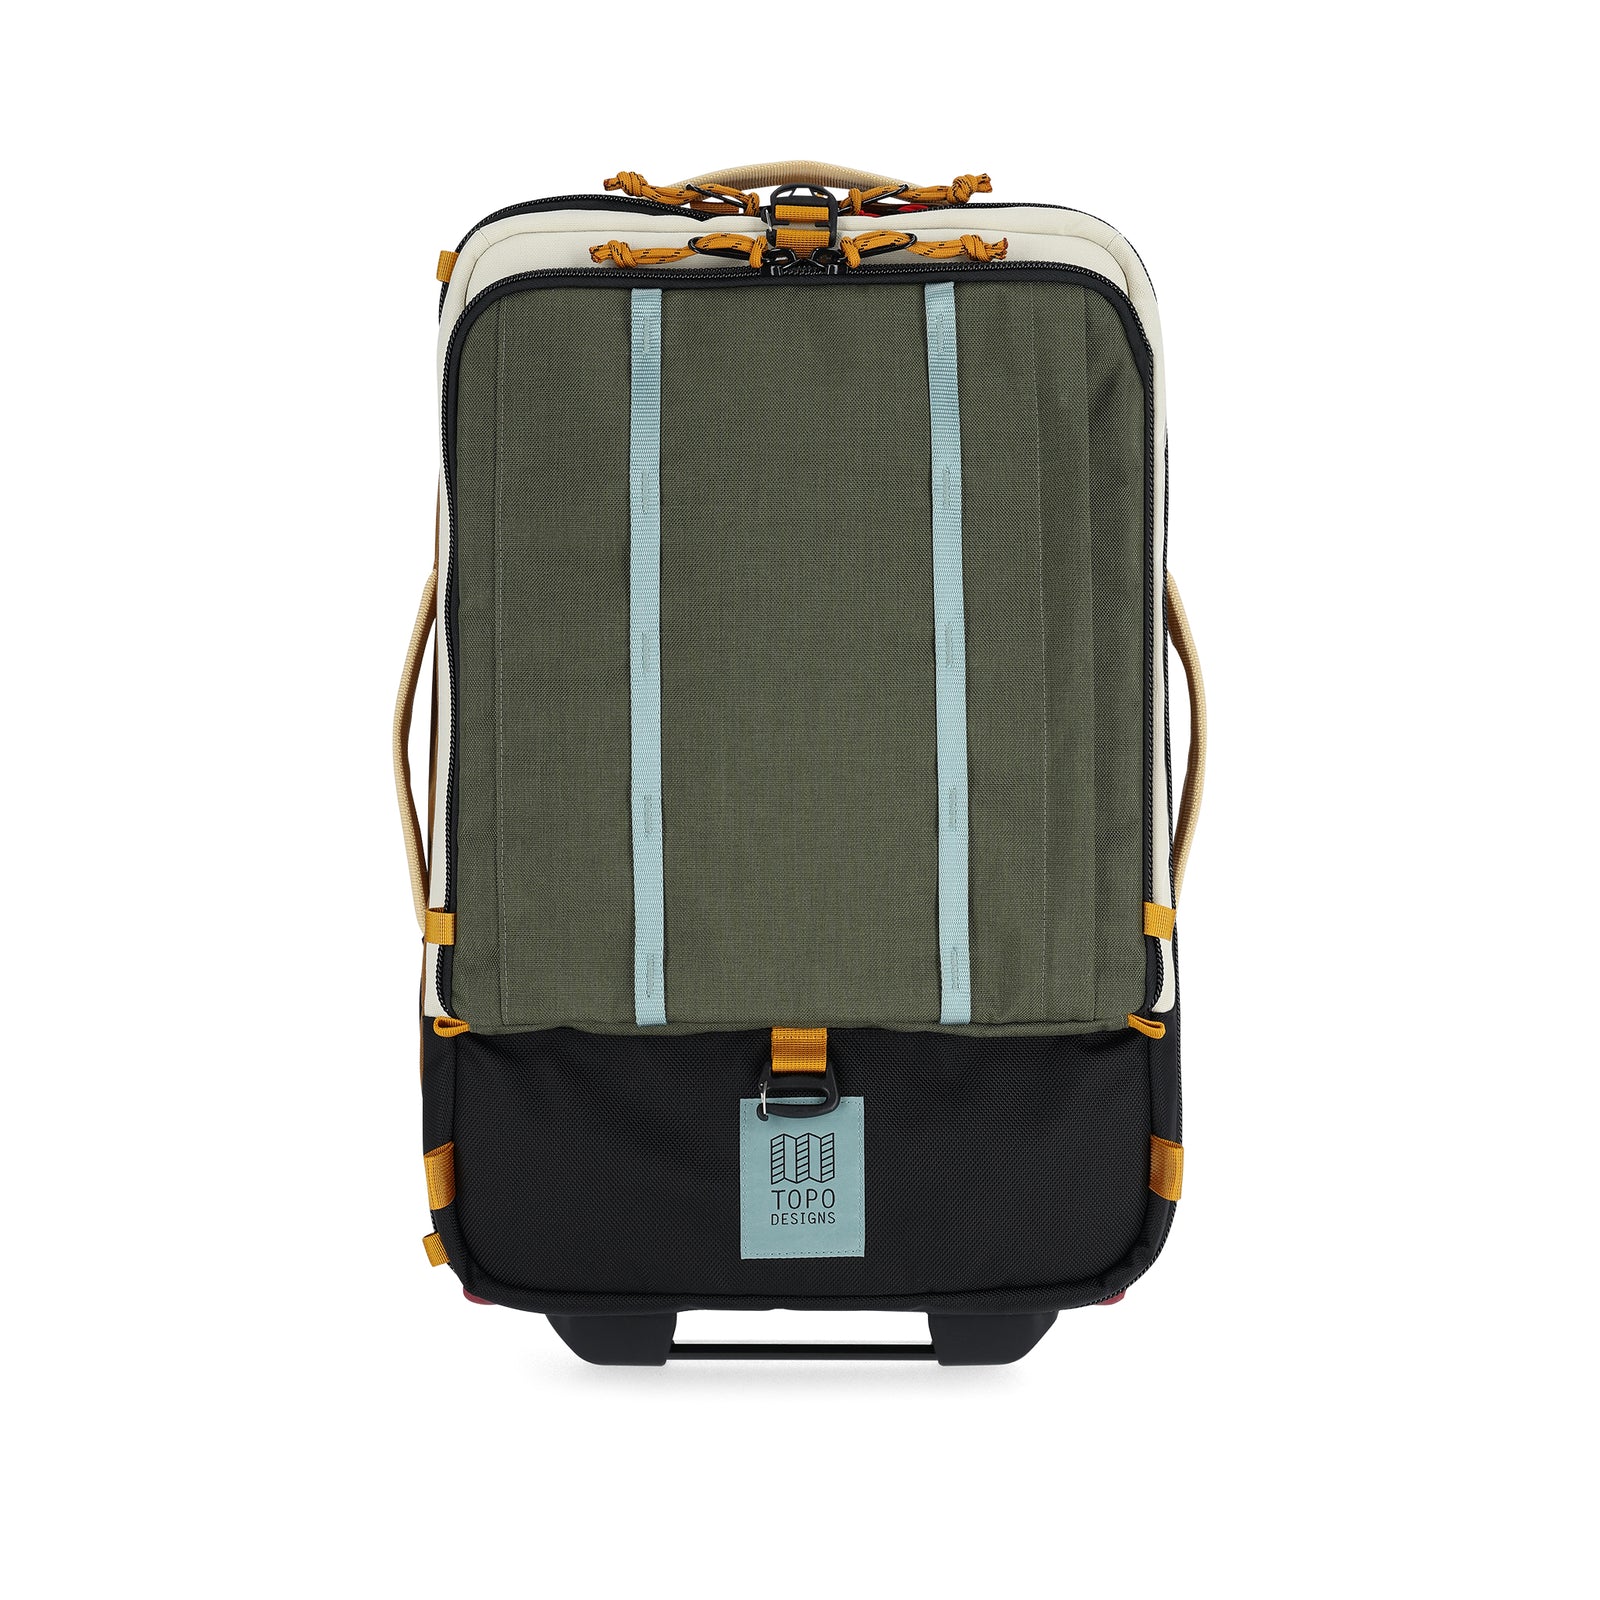 Front View of Topo Designs Global Travel Bag Roller  in "Bone White / Olive"